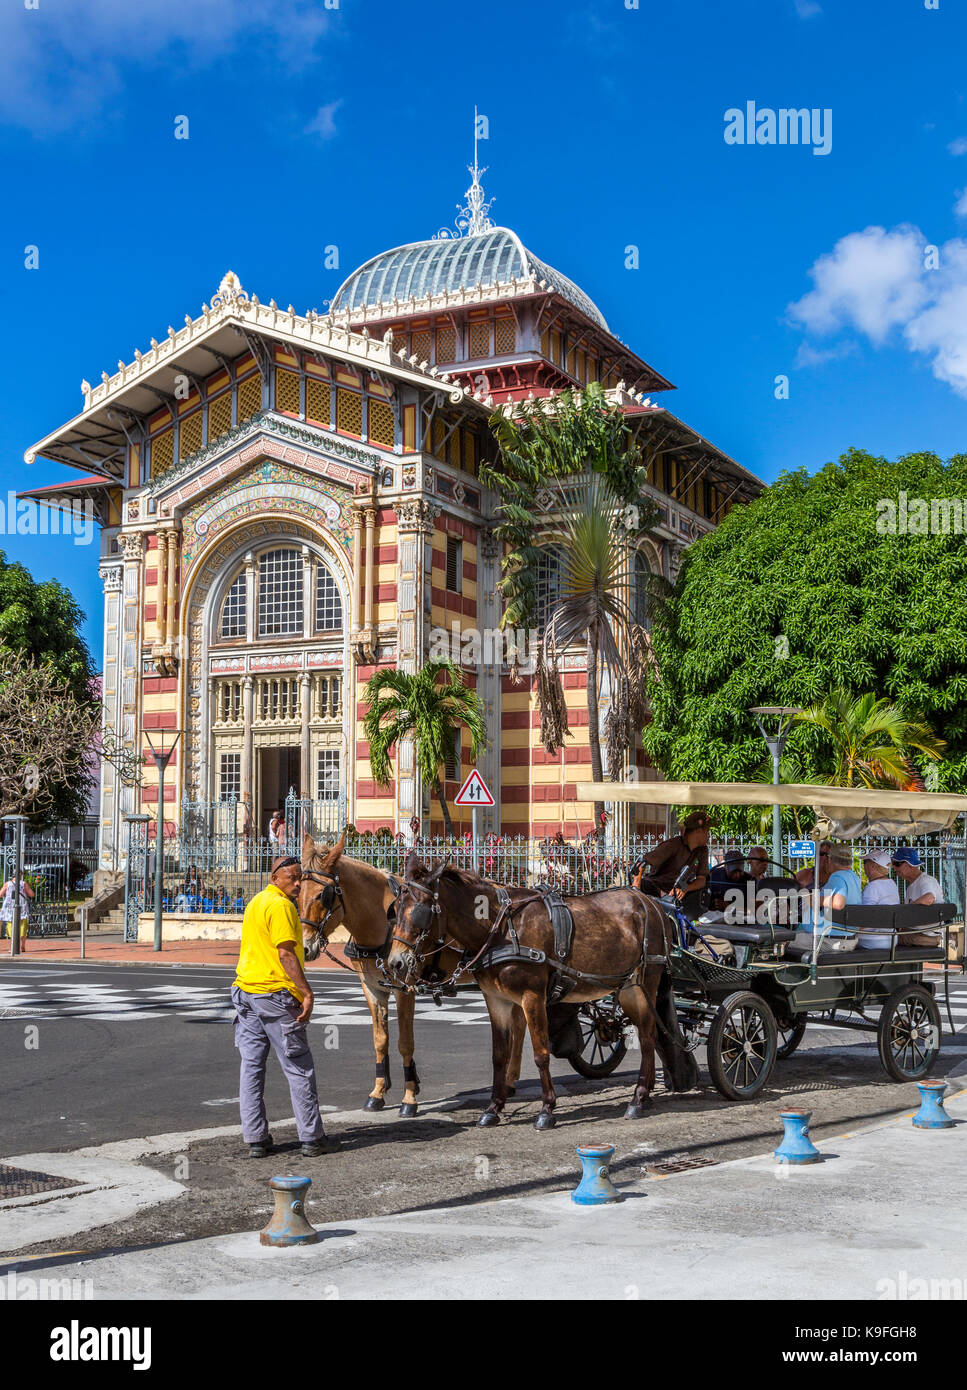 Fort-de-France, Martinique.  Tourists in Carriage  Passing the Victor Schoelcher Library Museum, Romanesque Architectural Style. Stock Photo